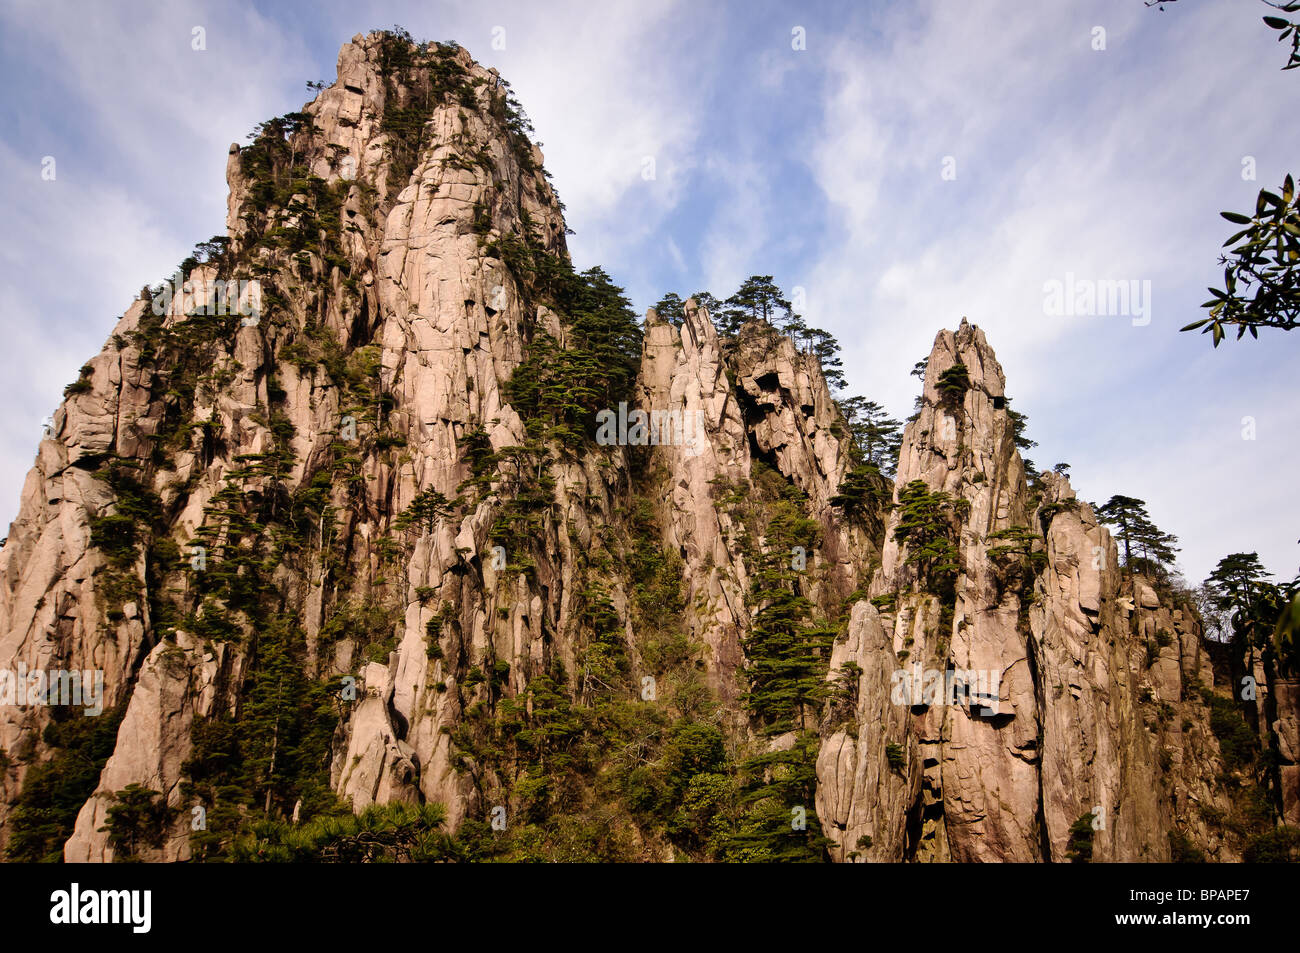 View of mountains against a blue sky with some clouds from the Huang Shan (Yellow Mountains) area in China. Stock Photo